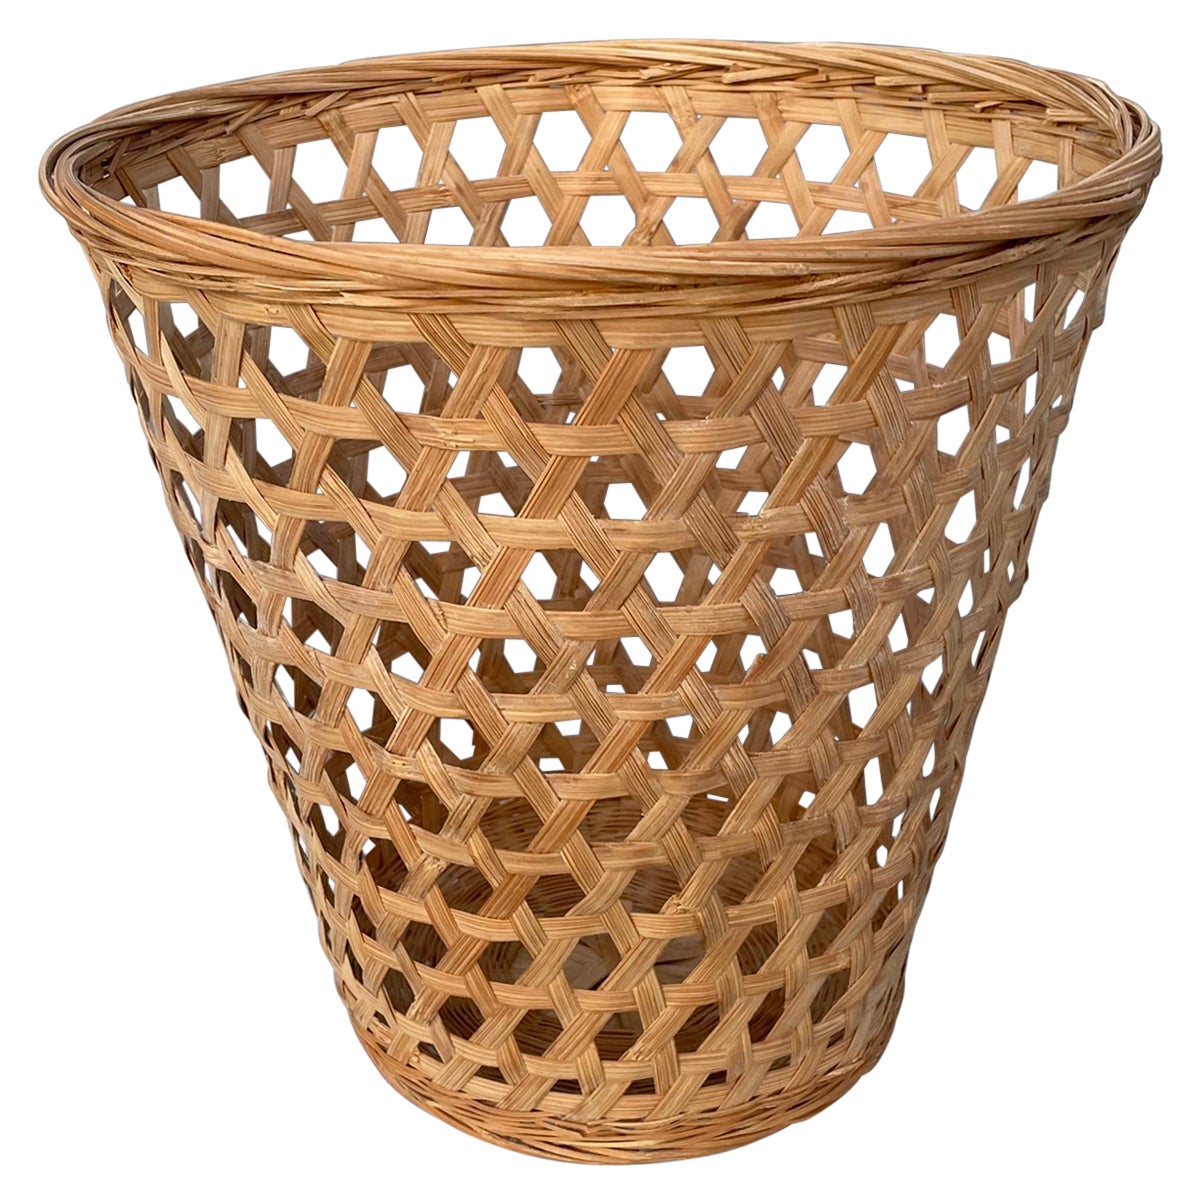 20th Century Open Weave Wicker Wastebasket or Trash Can For Sale